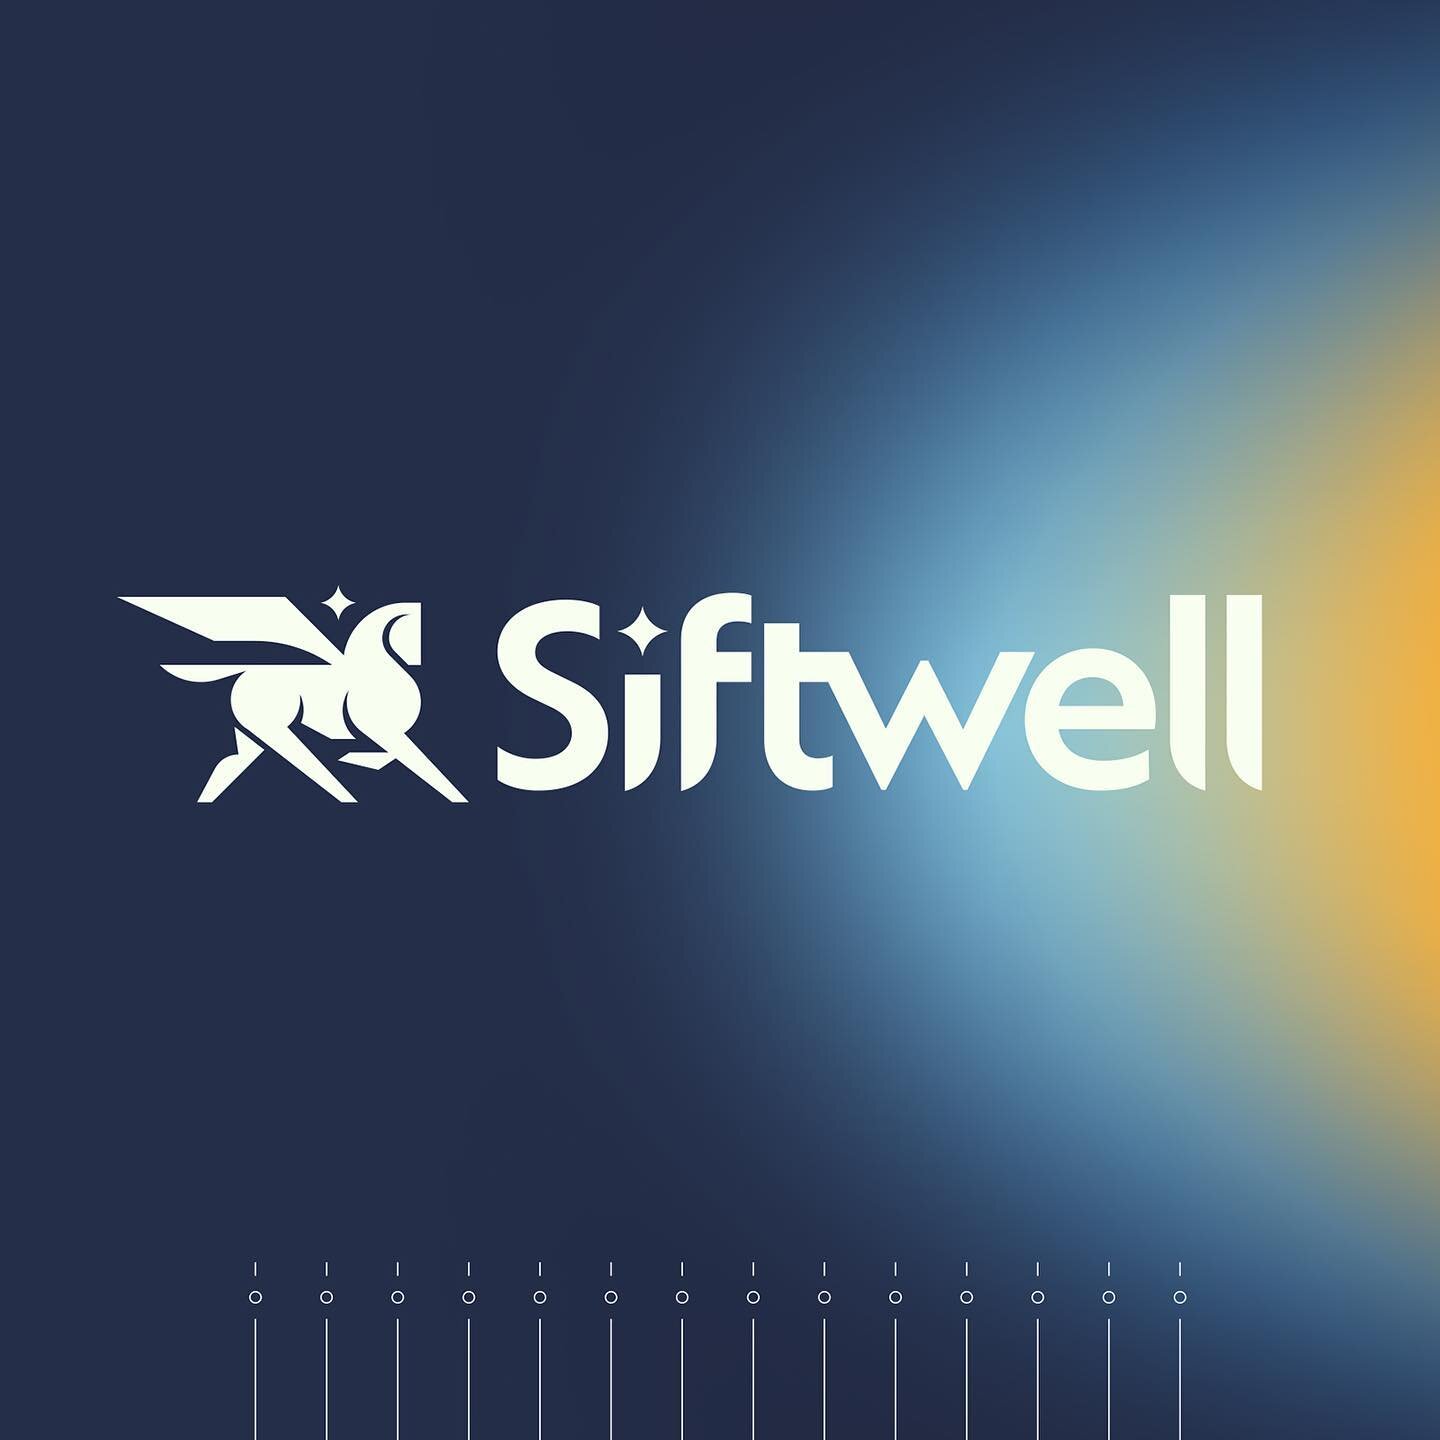 Excited to share some of our latest work for our partners at&nbsp;Siftwell Analytics, Inc.&nbsp;Siftwell tapped us to help build a data analytics brand that could truly stand out. We created a tech-forward, confident visual ID paired with a warm and 